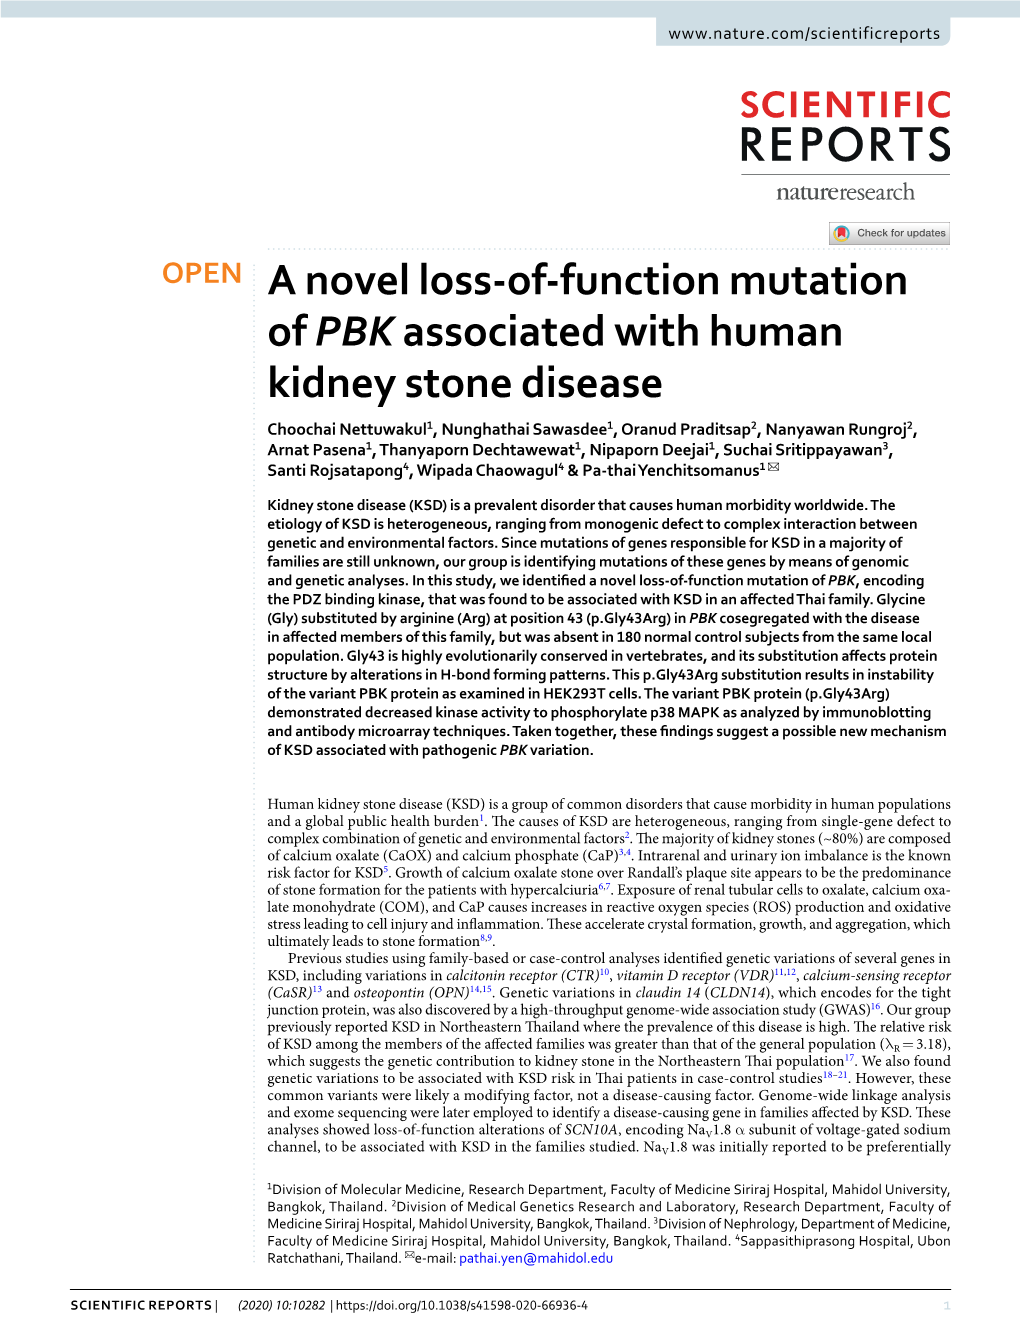 A Novel Loss-Of-Function Mutation of PBK Associated with Human Kidney